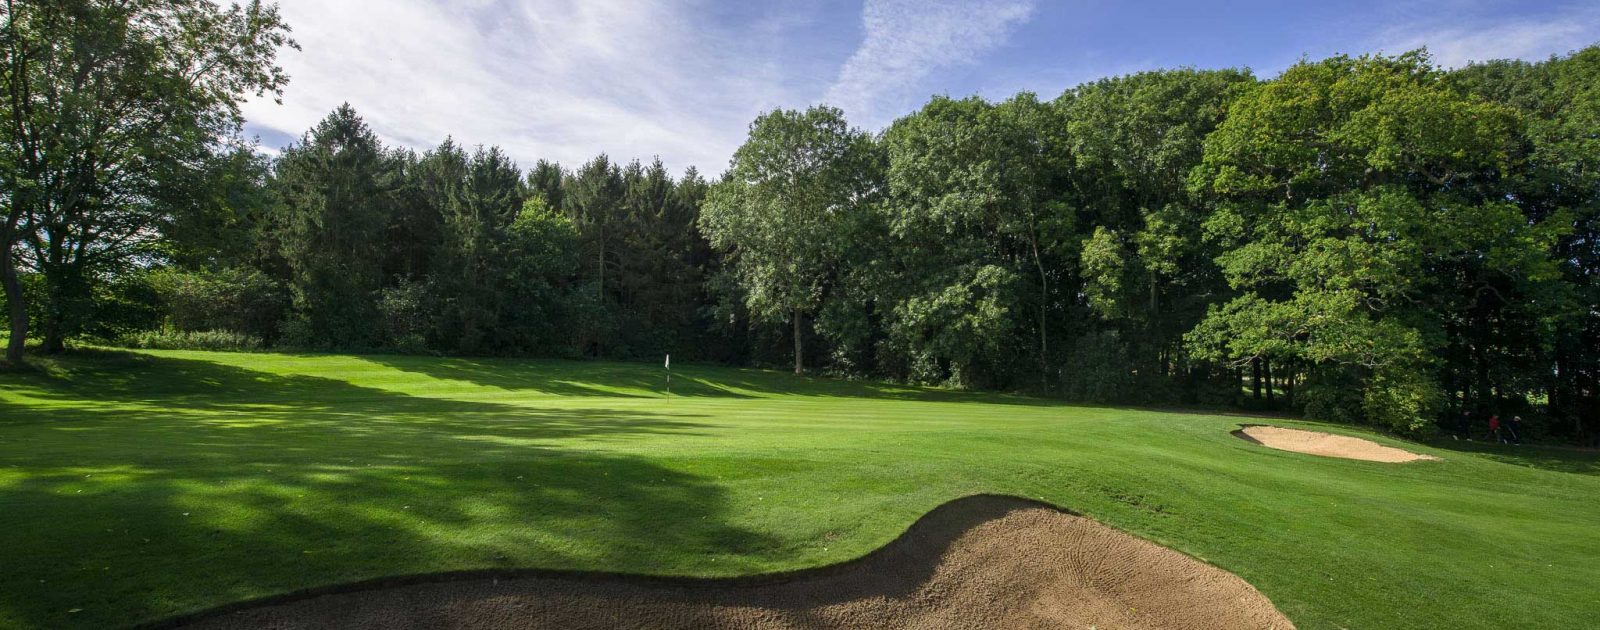 Redbourn Golf Club sloping green with bunker